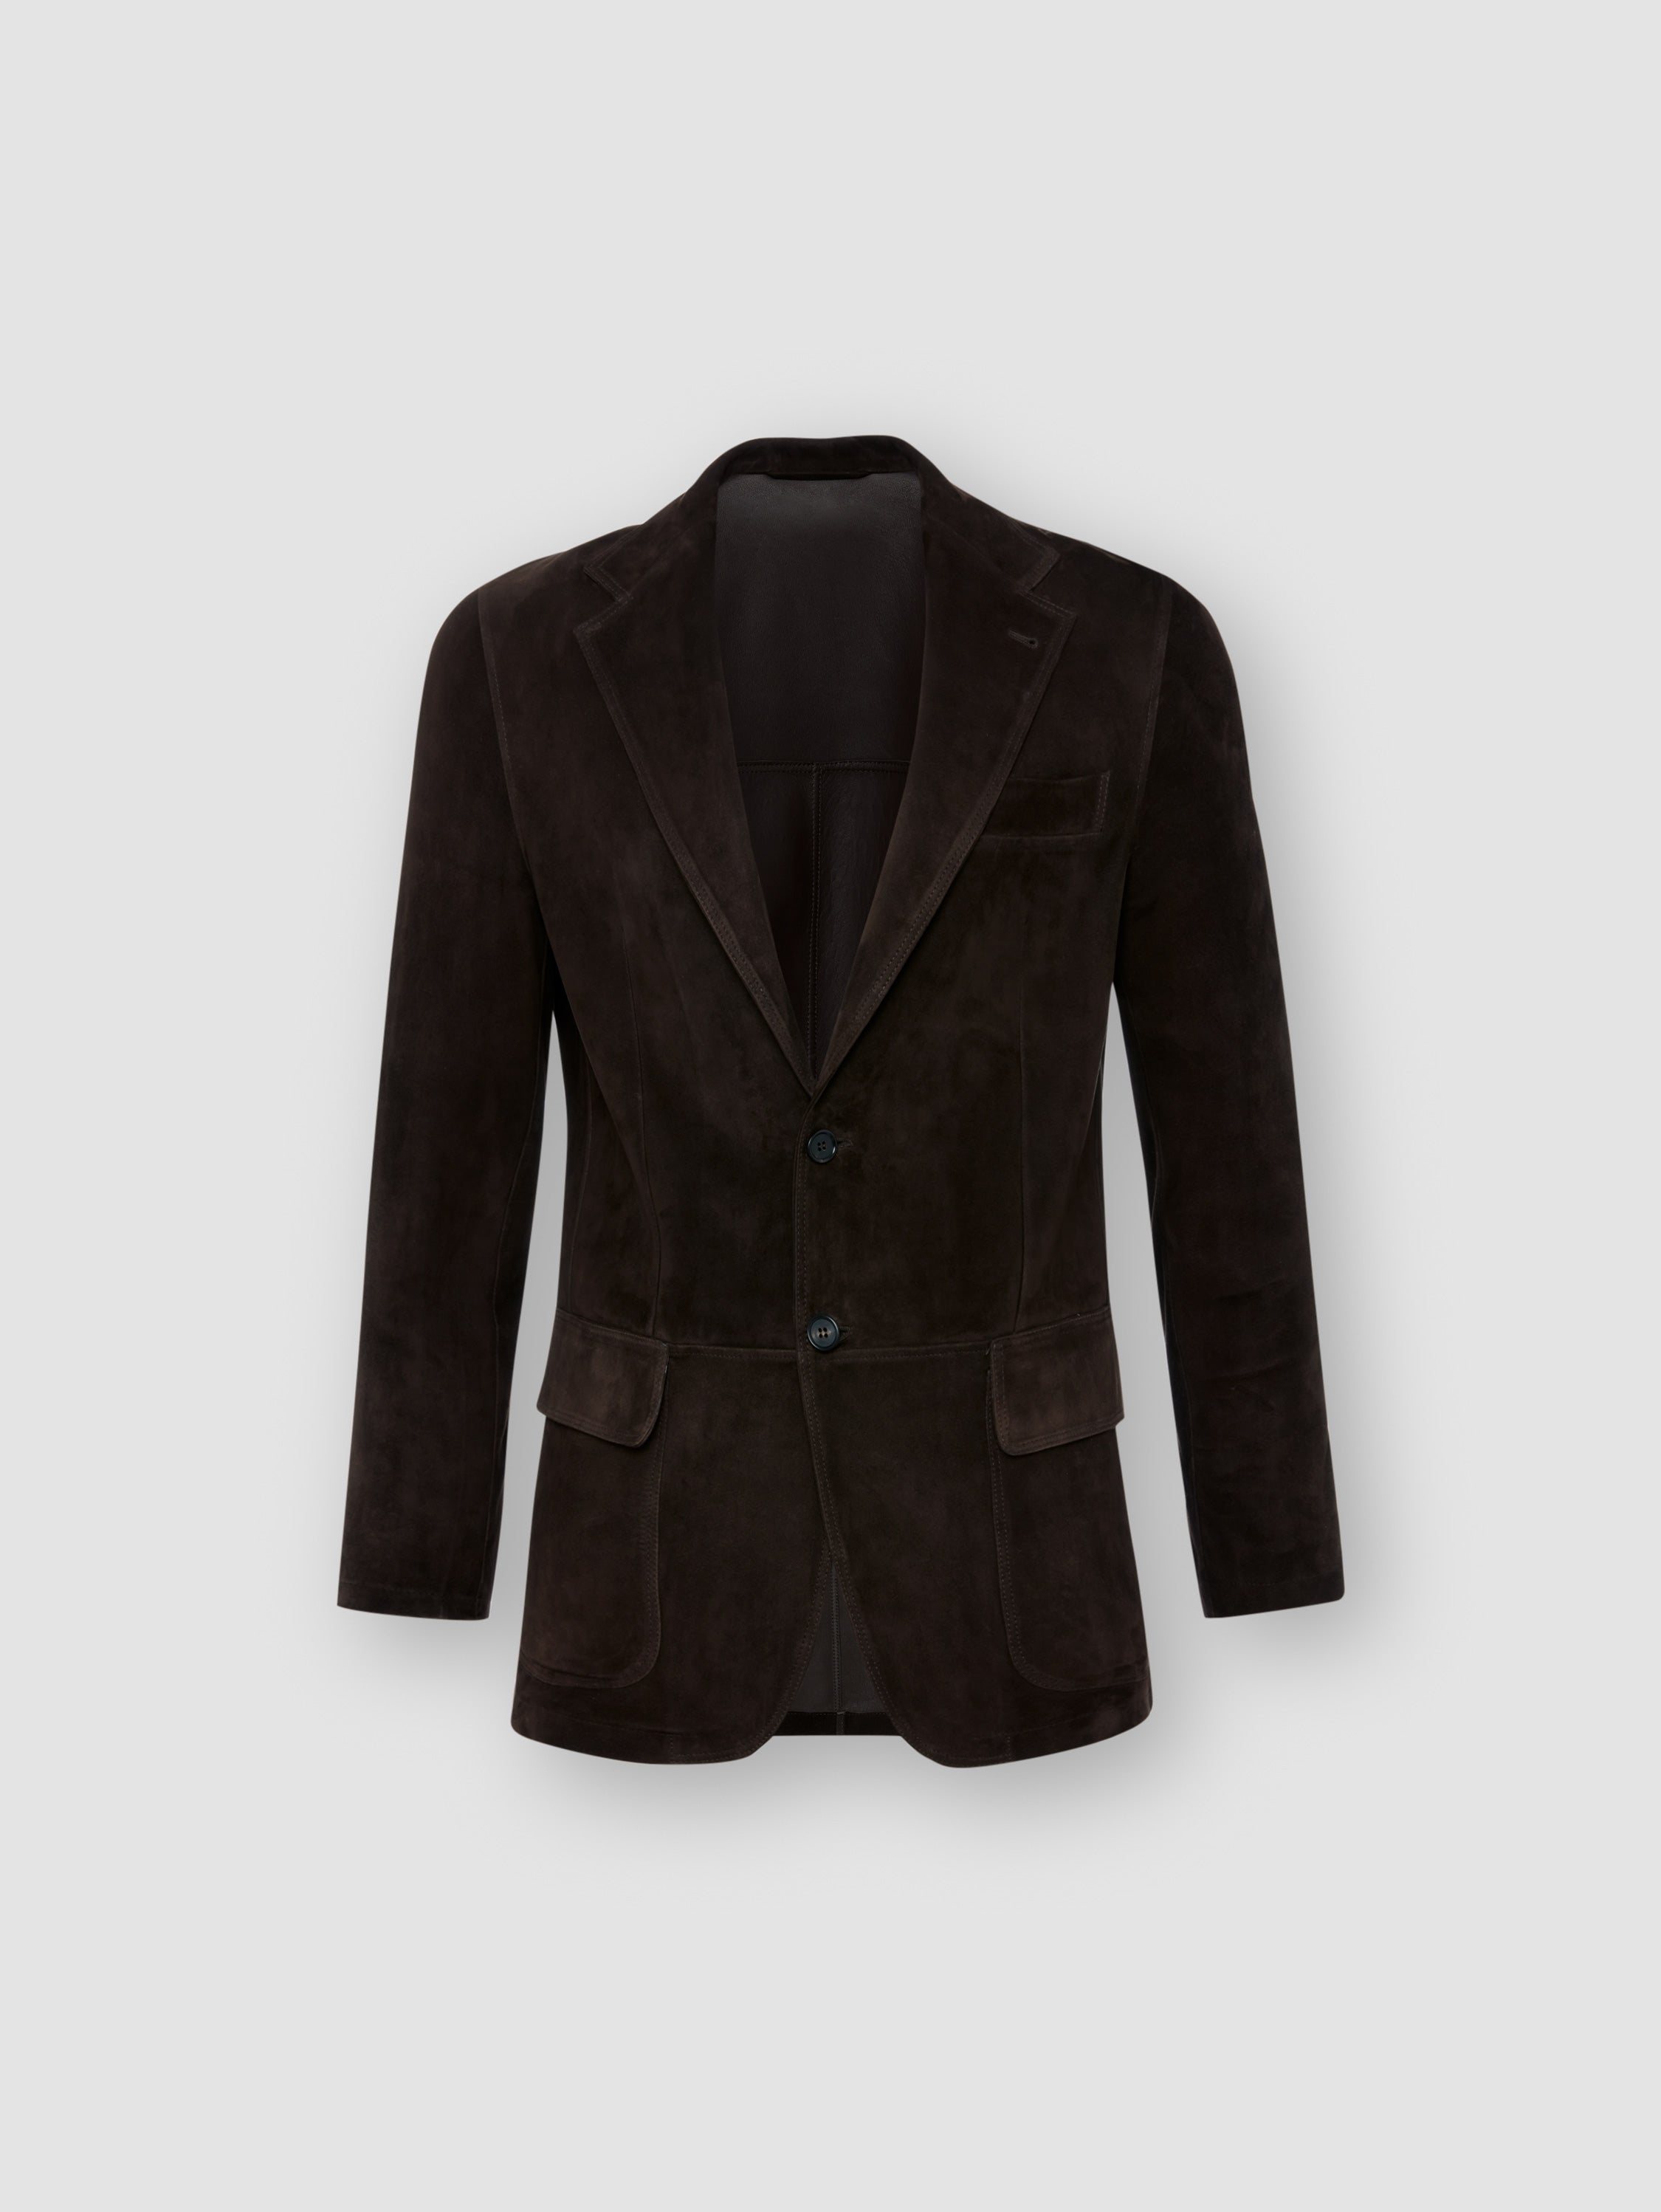 Suede Notch Lapel Jacket Brown Product Image